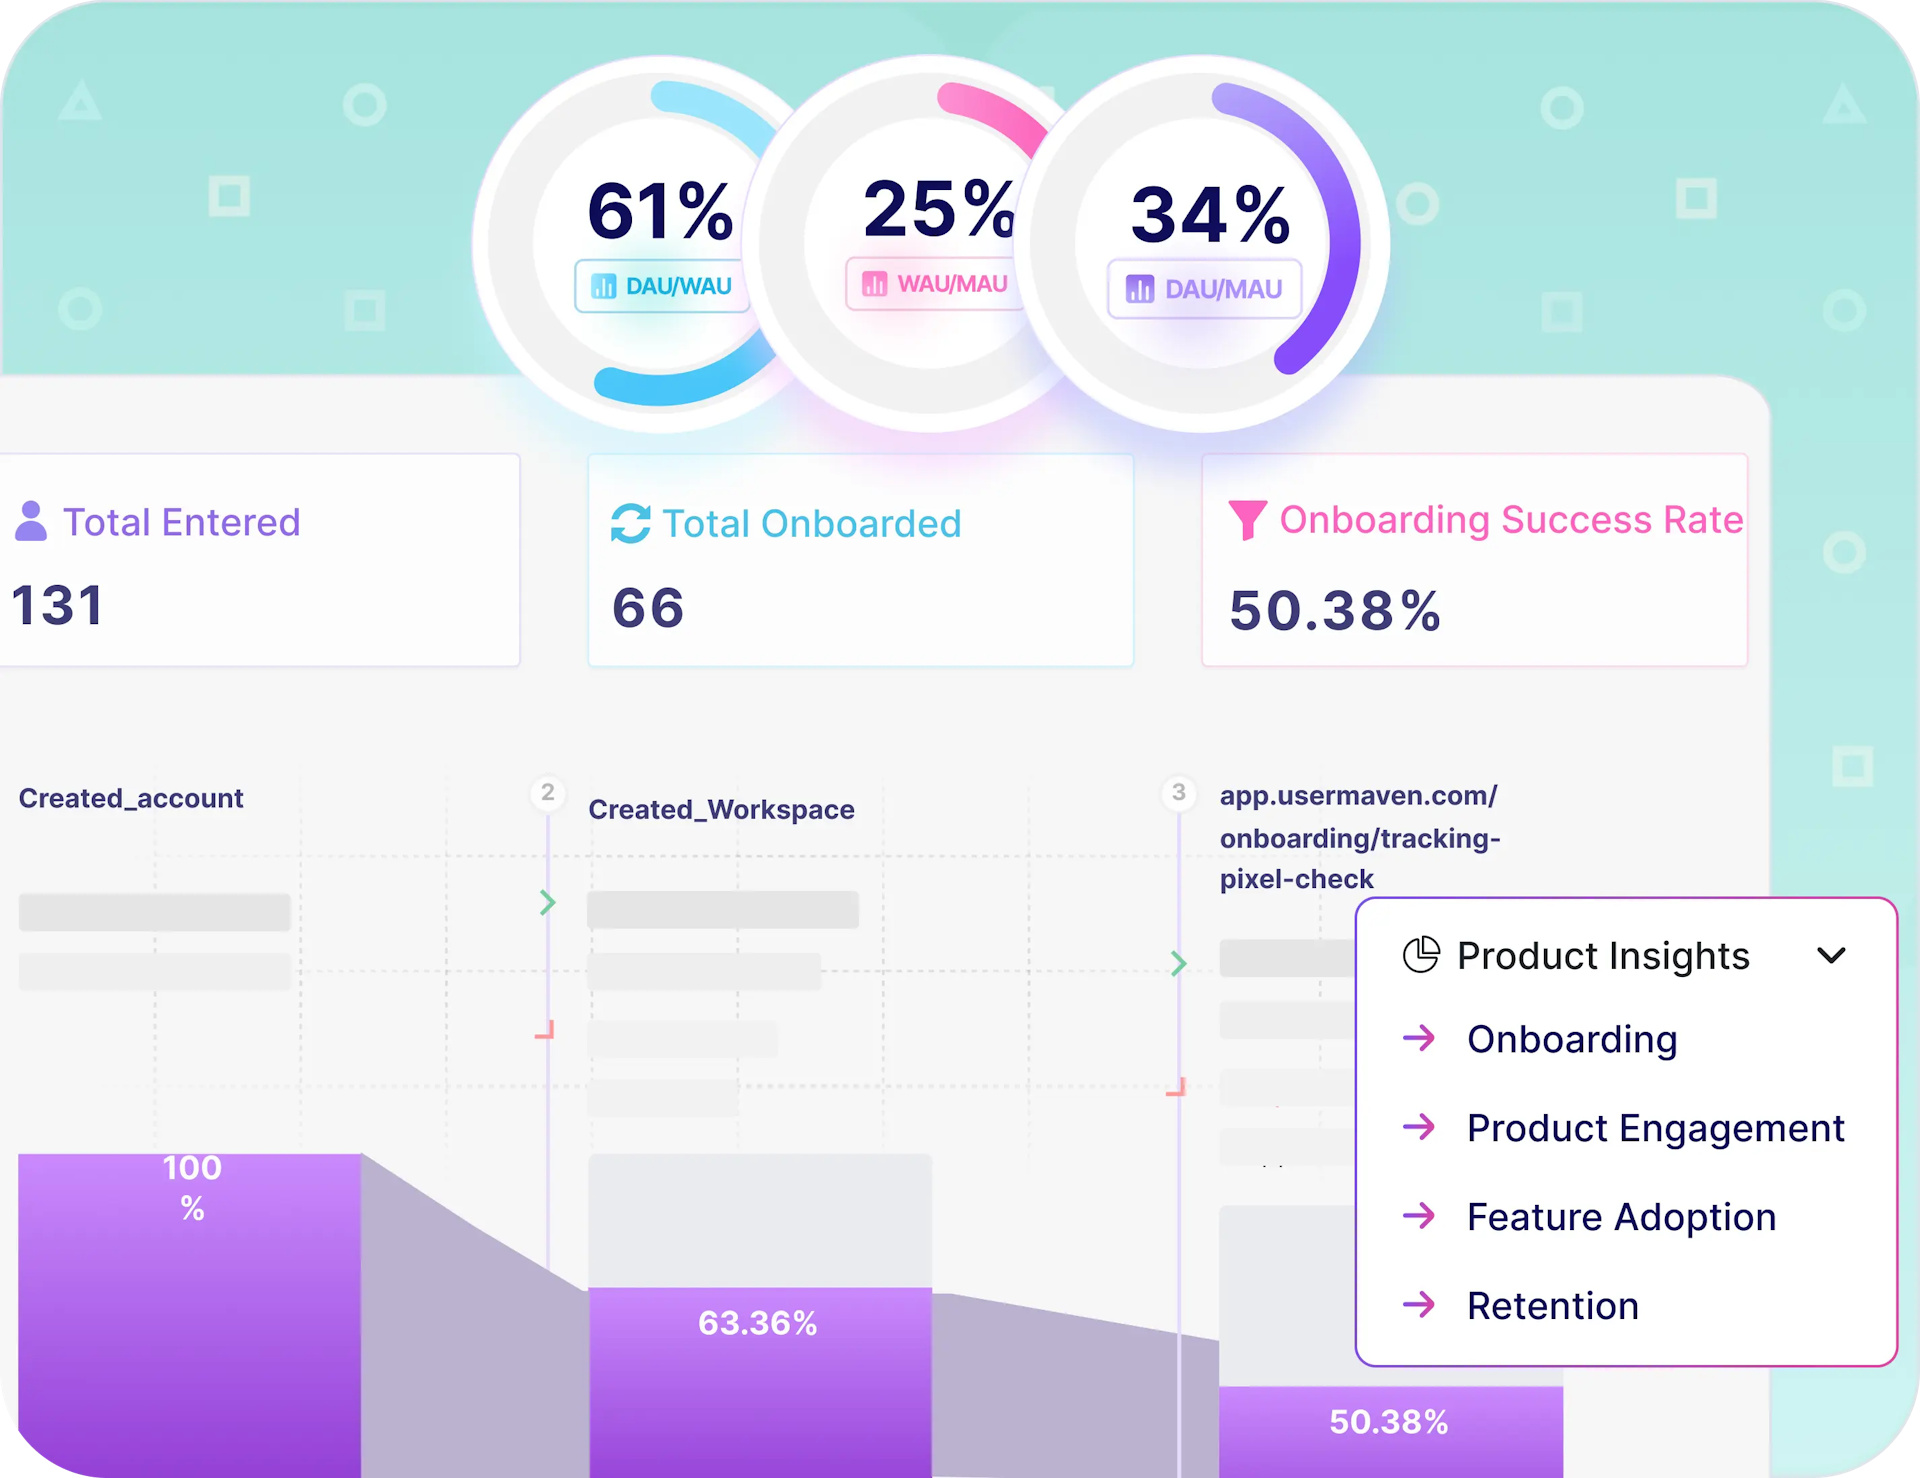 SaaSential insights for your product’s growth